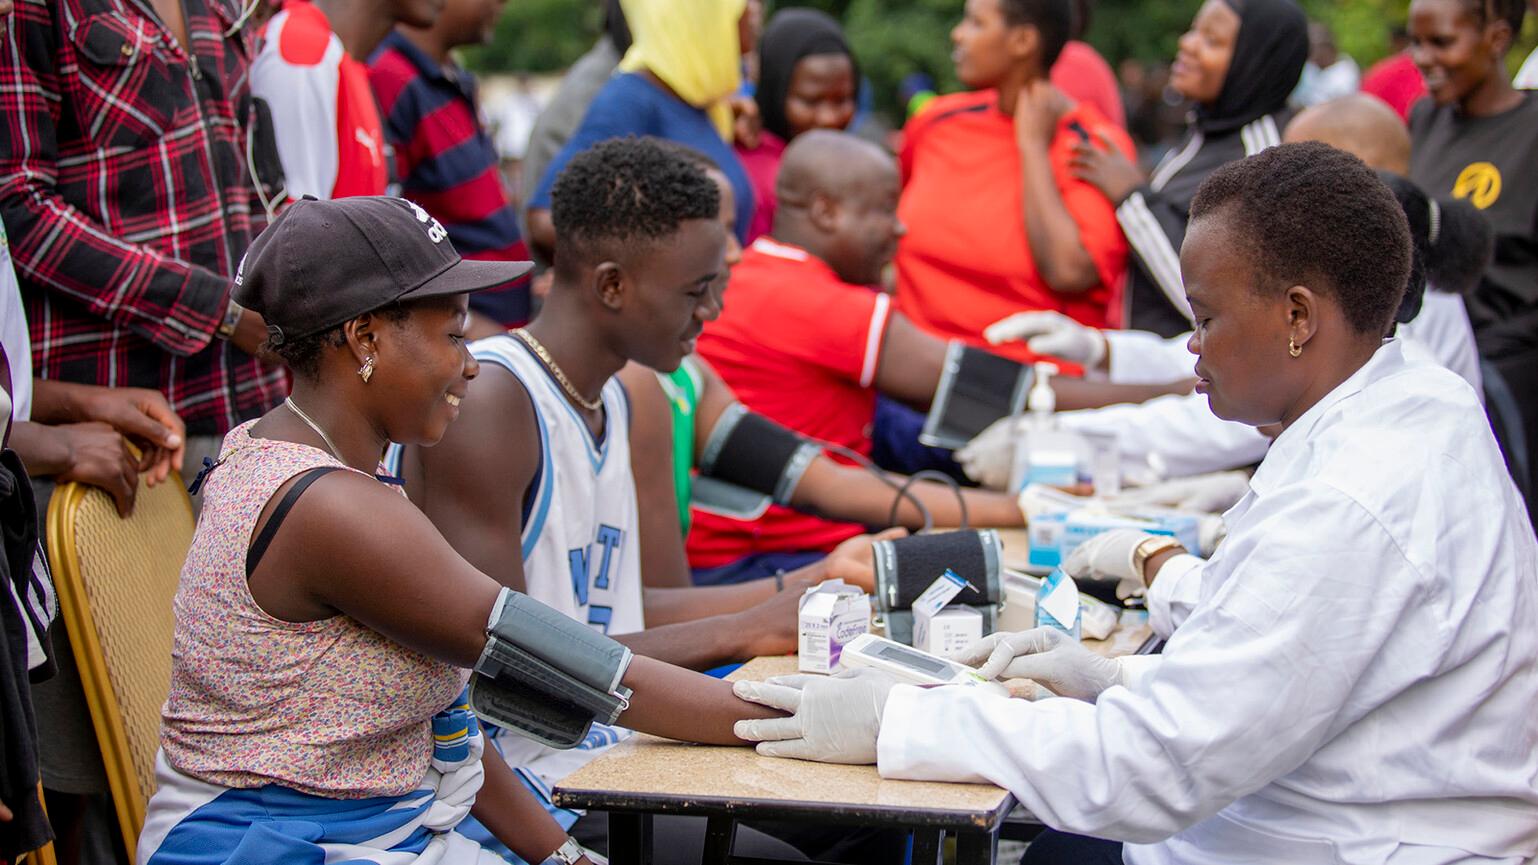 People sat at a table get vaccinated against Ebola as part of a community event.